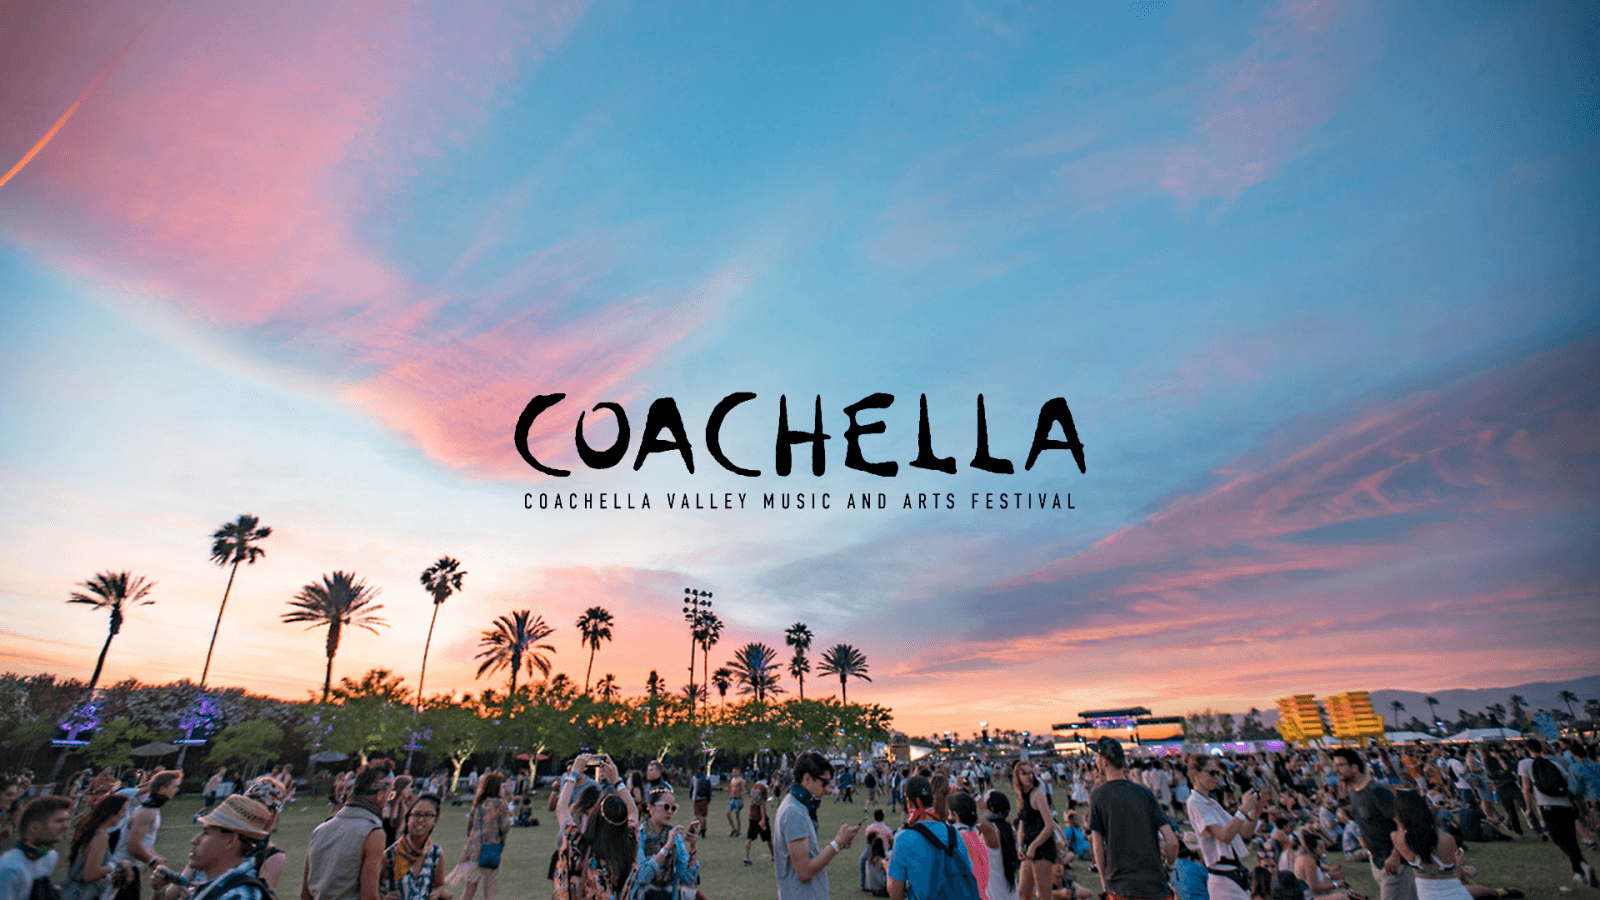 7 Coachella Acts We're Pumped About, And They Aren't Headliners